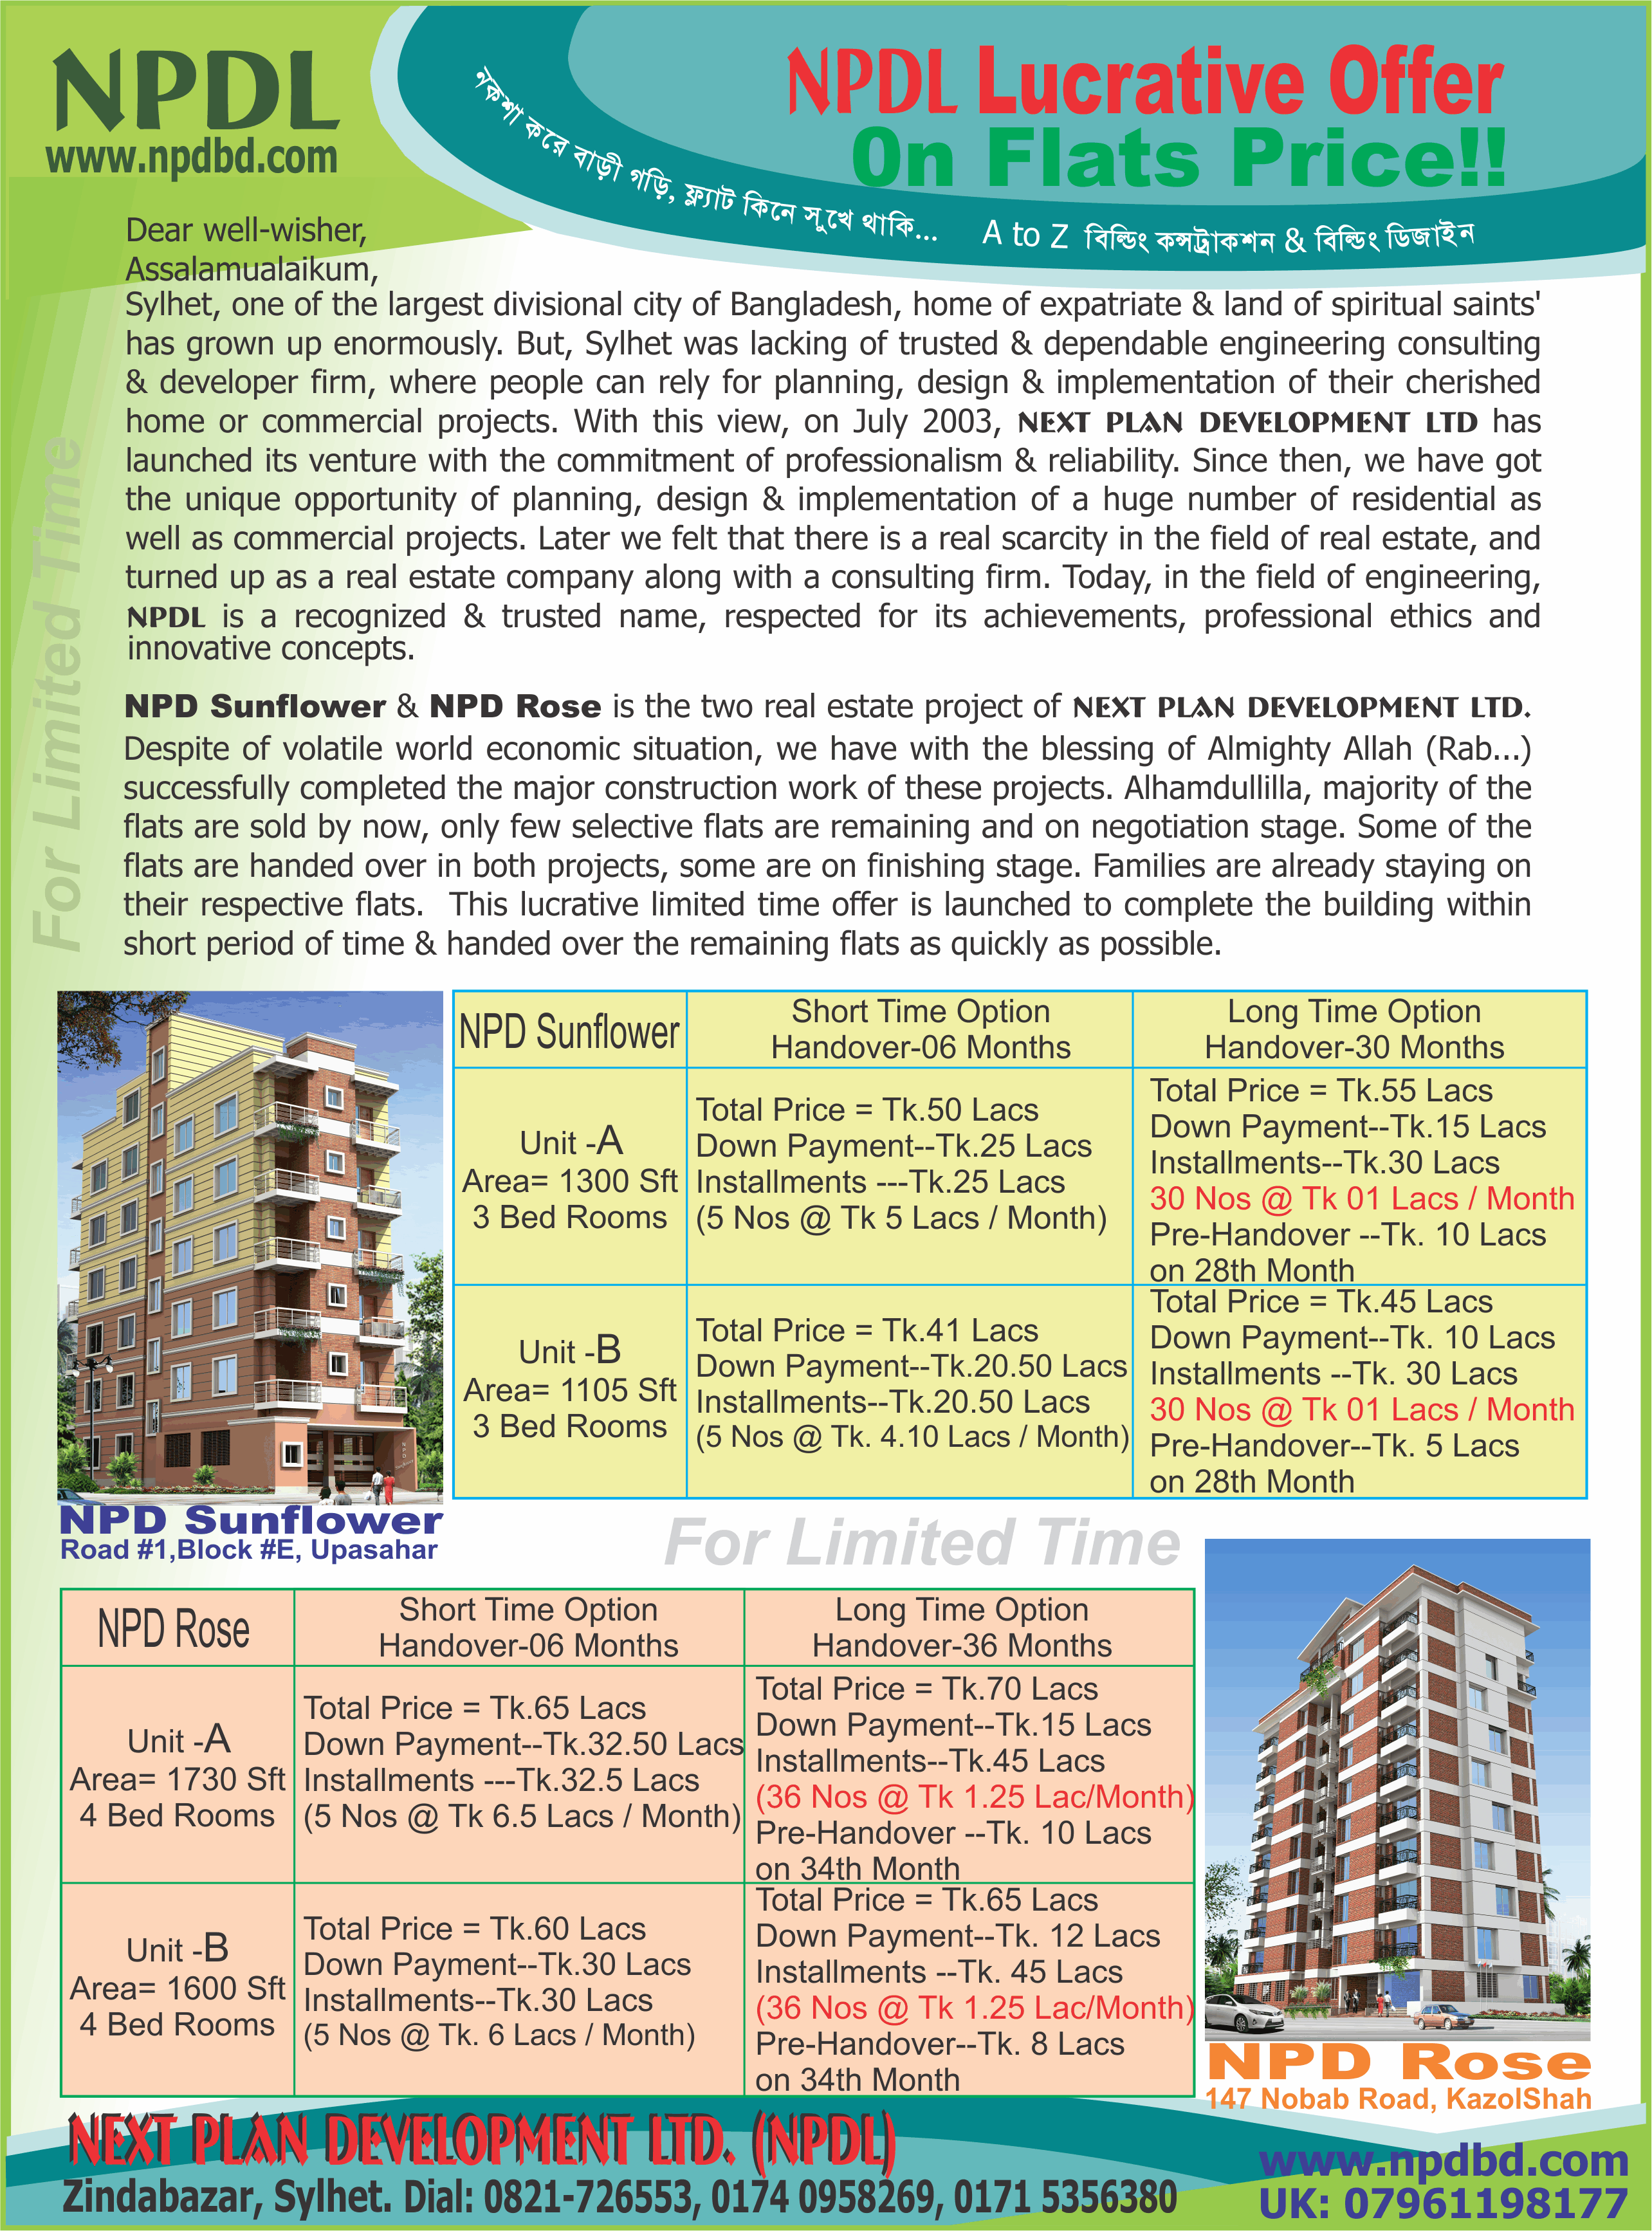 NPDL Lucrative Offer!!! On Apartment/Flats Price!!! For Limited Time!!!